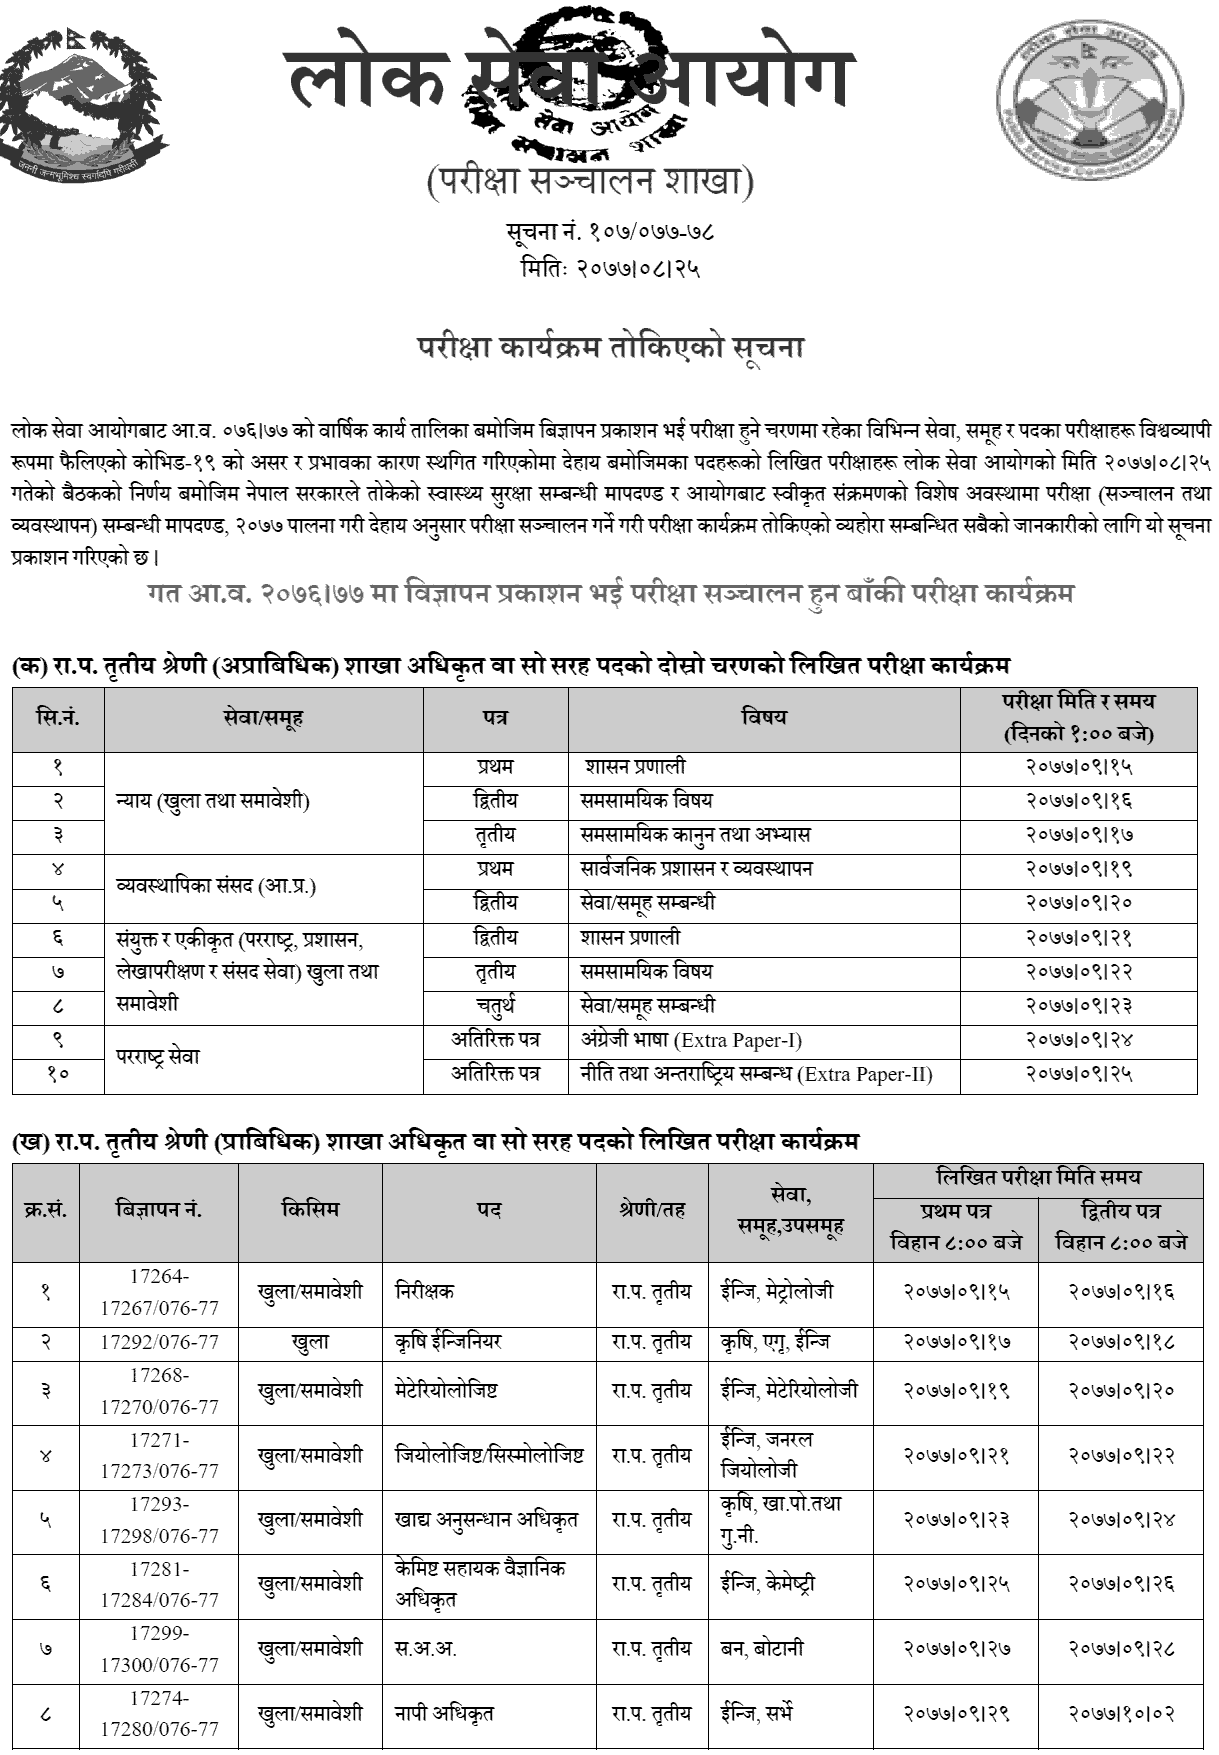 Section Officer (Technical and Non-Technical) Written Examination Schedule - Lok Sewa Aayog